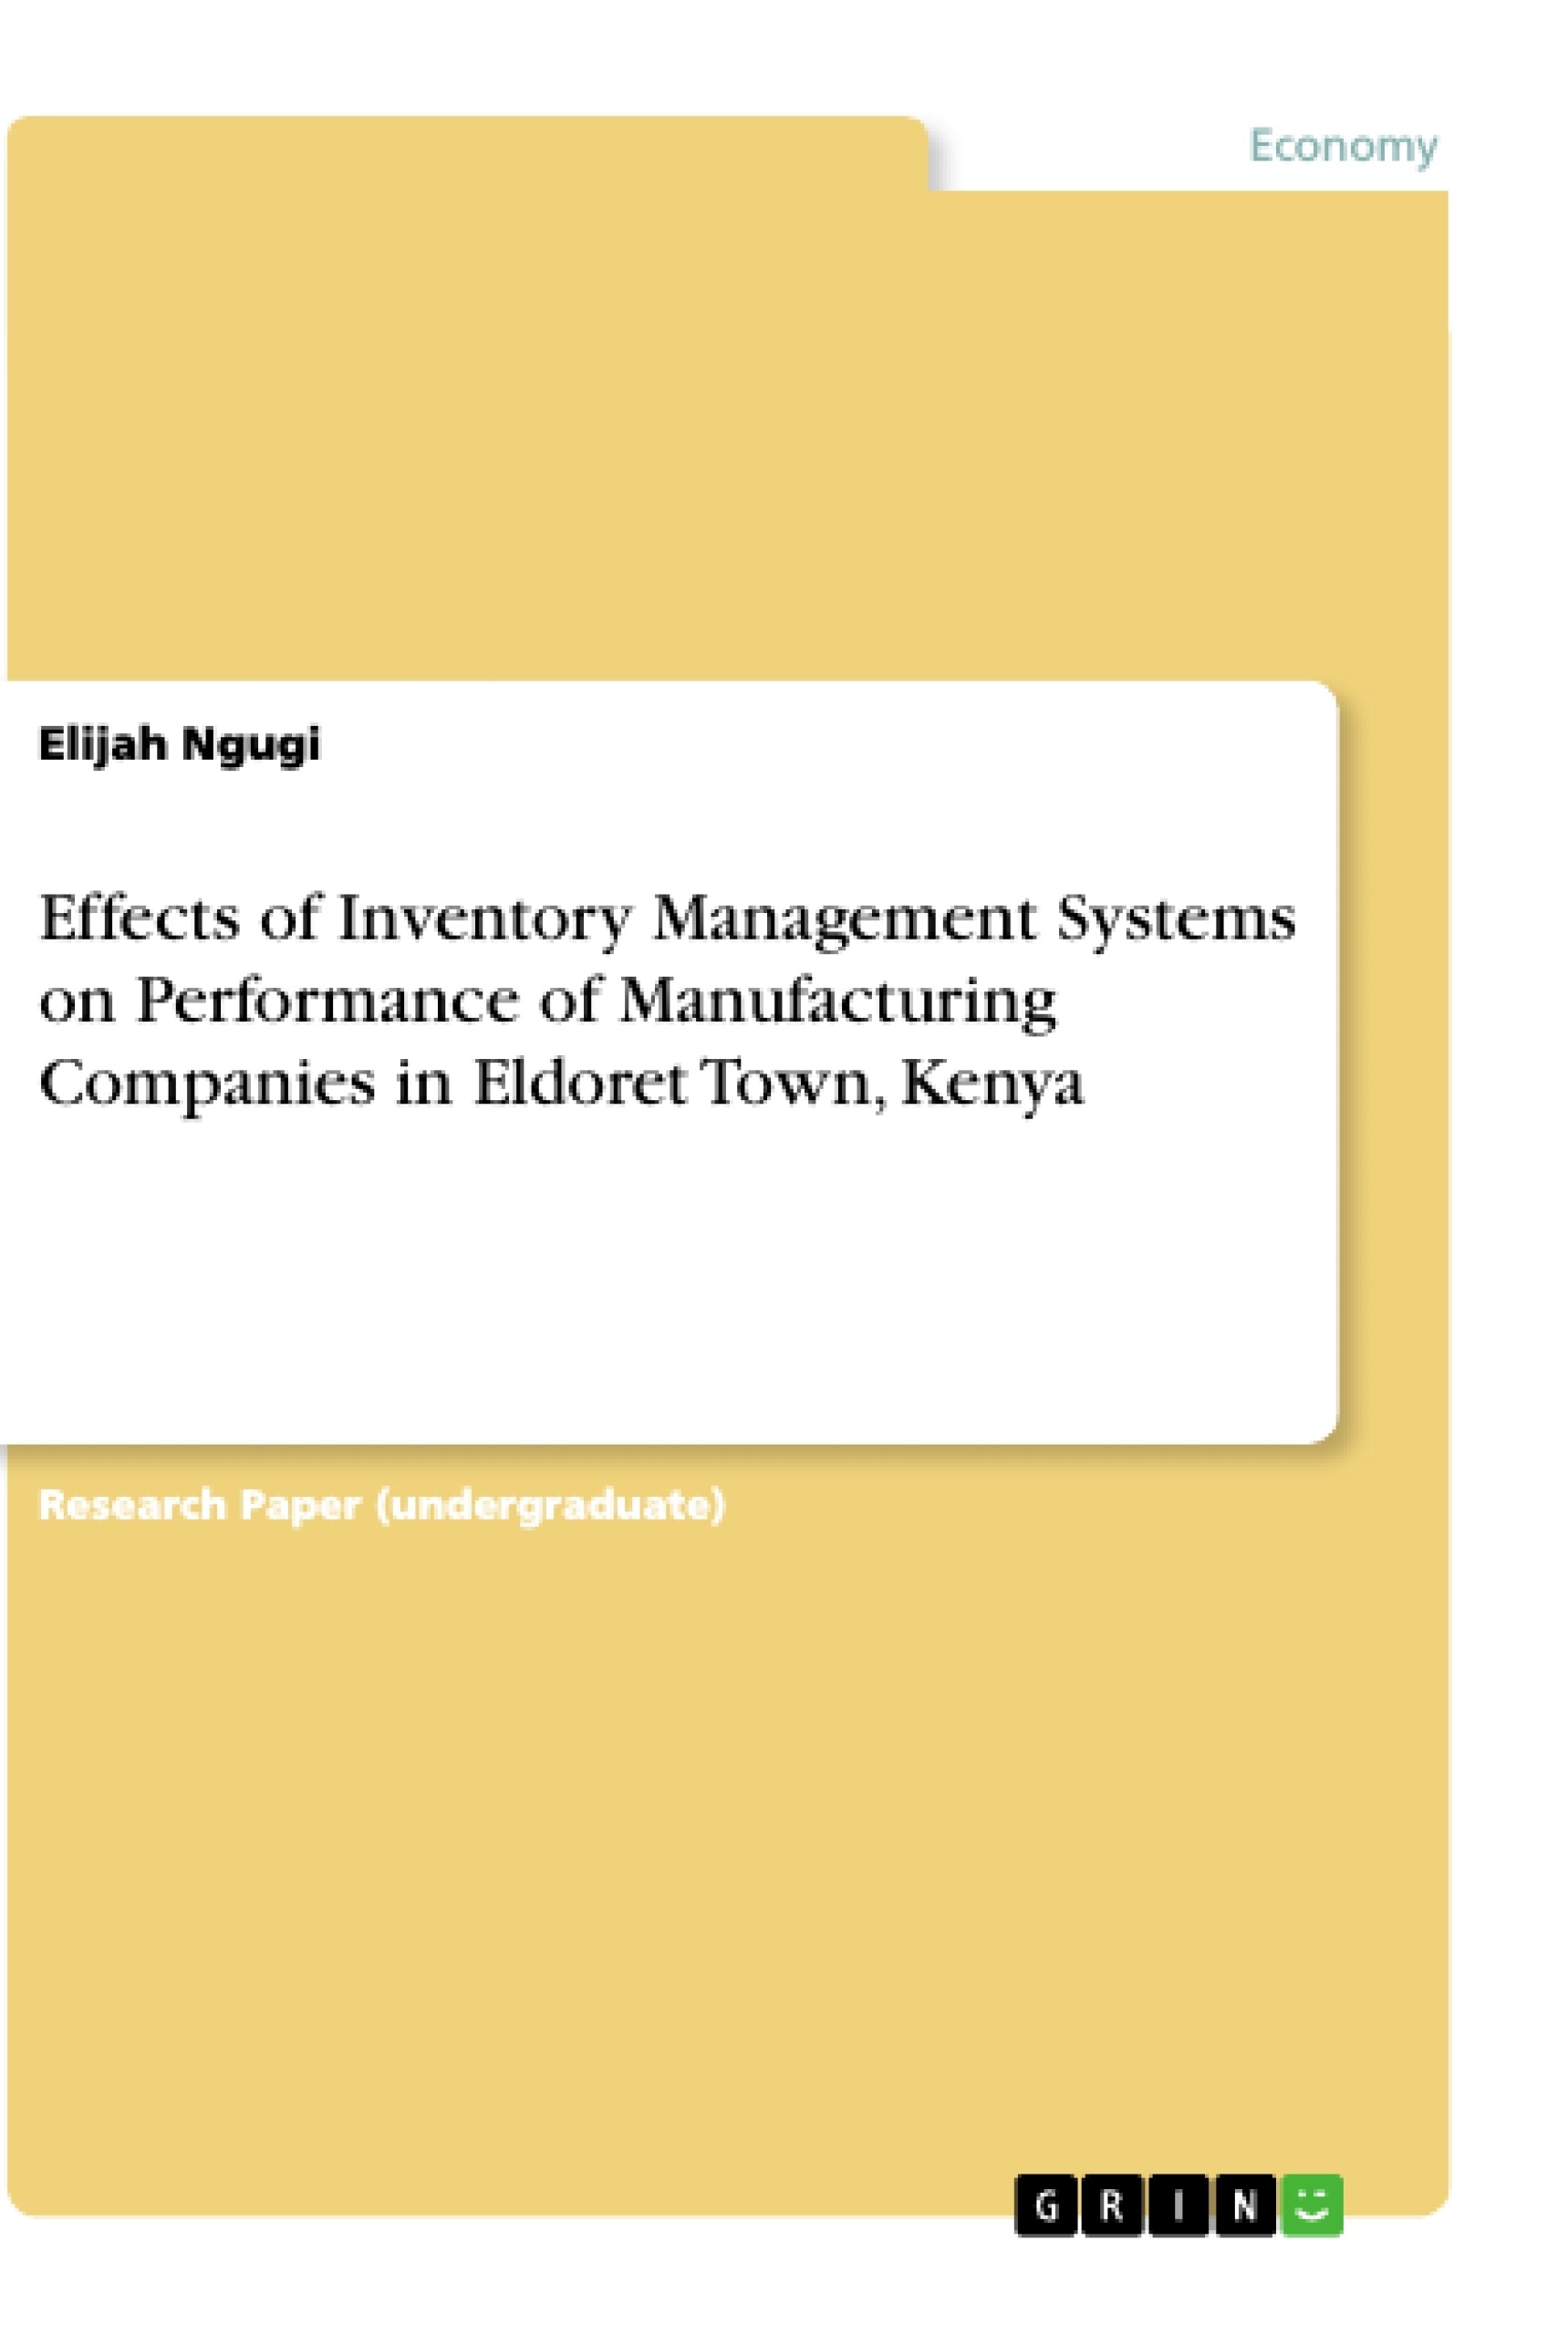 Title: Effects of Inventory Management Systems on Performance of Manufacturing Companies in Eldoret Town, Kenya